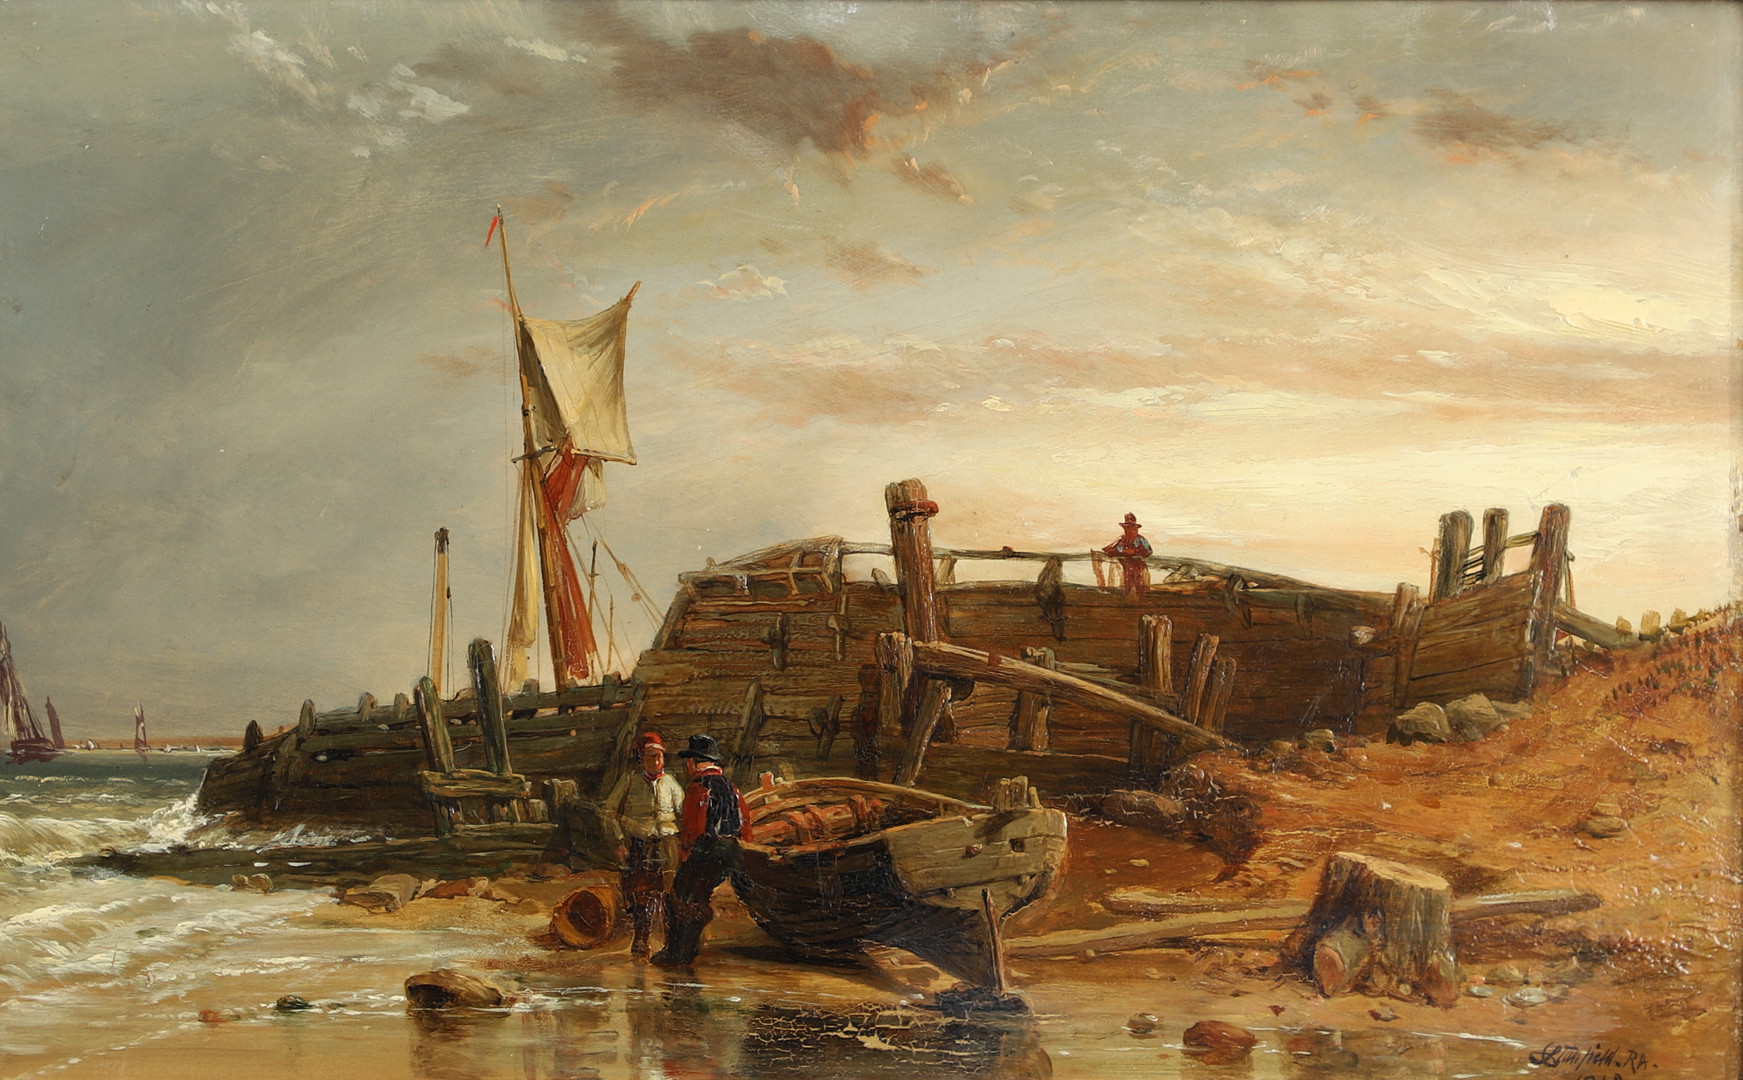 CLARKSON FREDERICK STANFIELD, RA, RBA (1793-1867). FISHERMEN WITH BOATS BY A JETTY. - Image 2 of 4